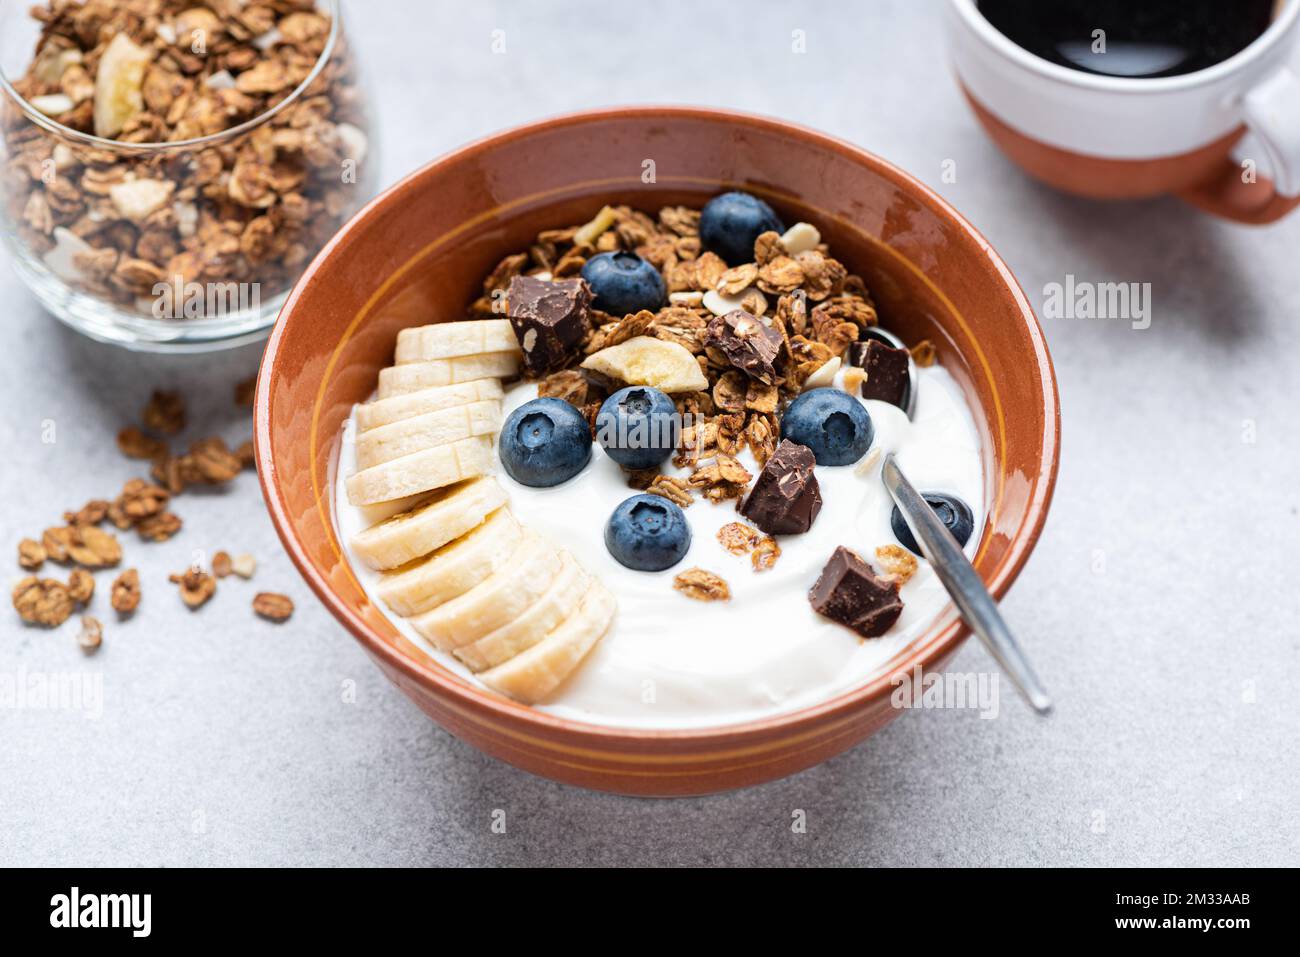 Yogurt with granola, banana, blueberries and dark chocolate in bowl, grey cocnrete table background, closeup view. Healthy food Stock Photo